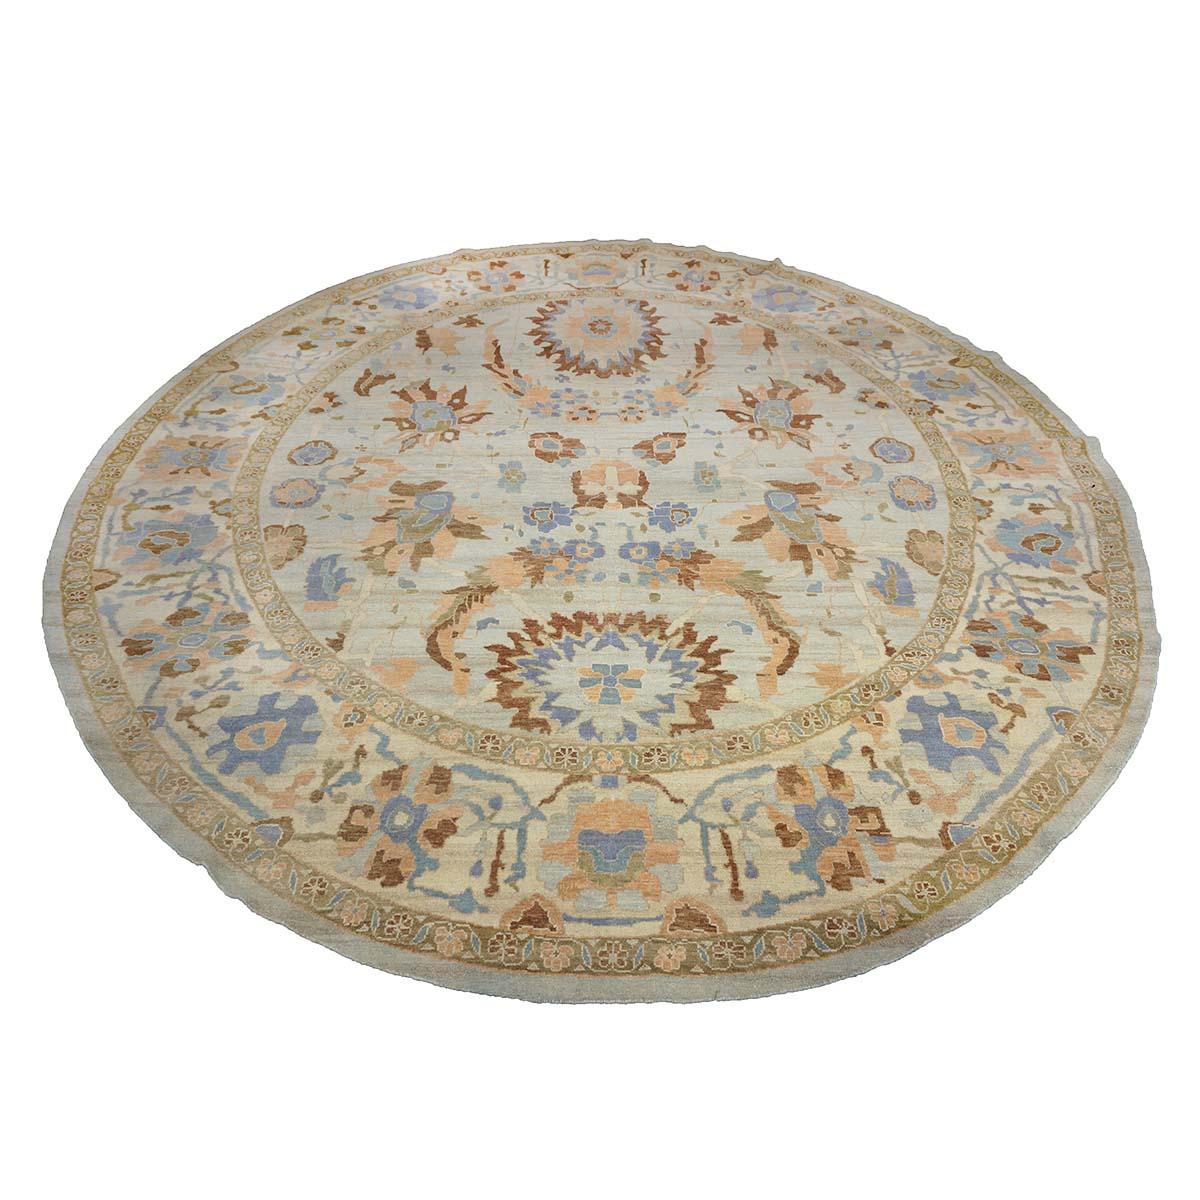 Ashly Fine Rugs presents a Round antique recreation of an original Persian Sultanabad Handmade Area Rug. Part of our own limited production, this antique recreation was thought of and created in-house and 100% handmade in Afghanistan by master